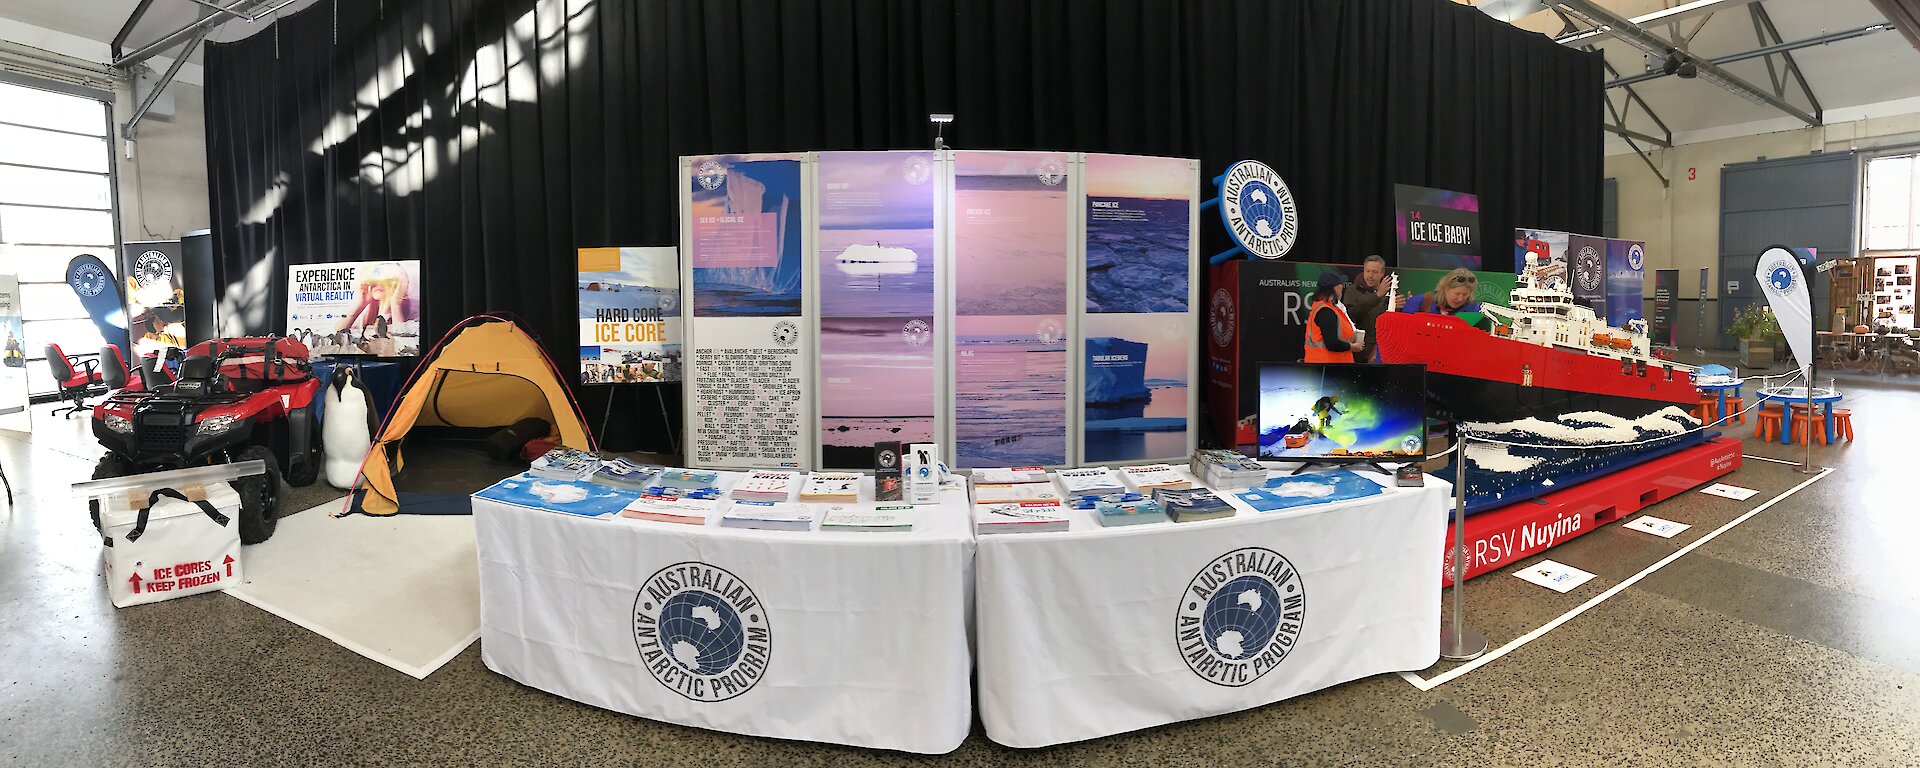 The Australian Antarctic Division’s display for the Festival of Bright Ideas.